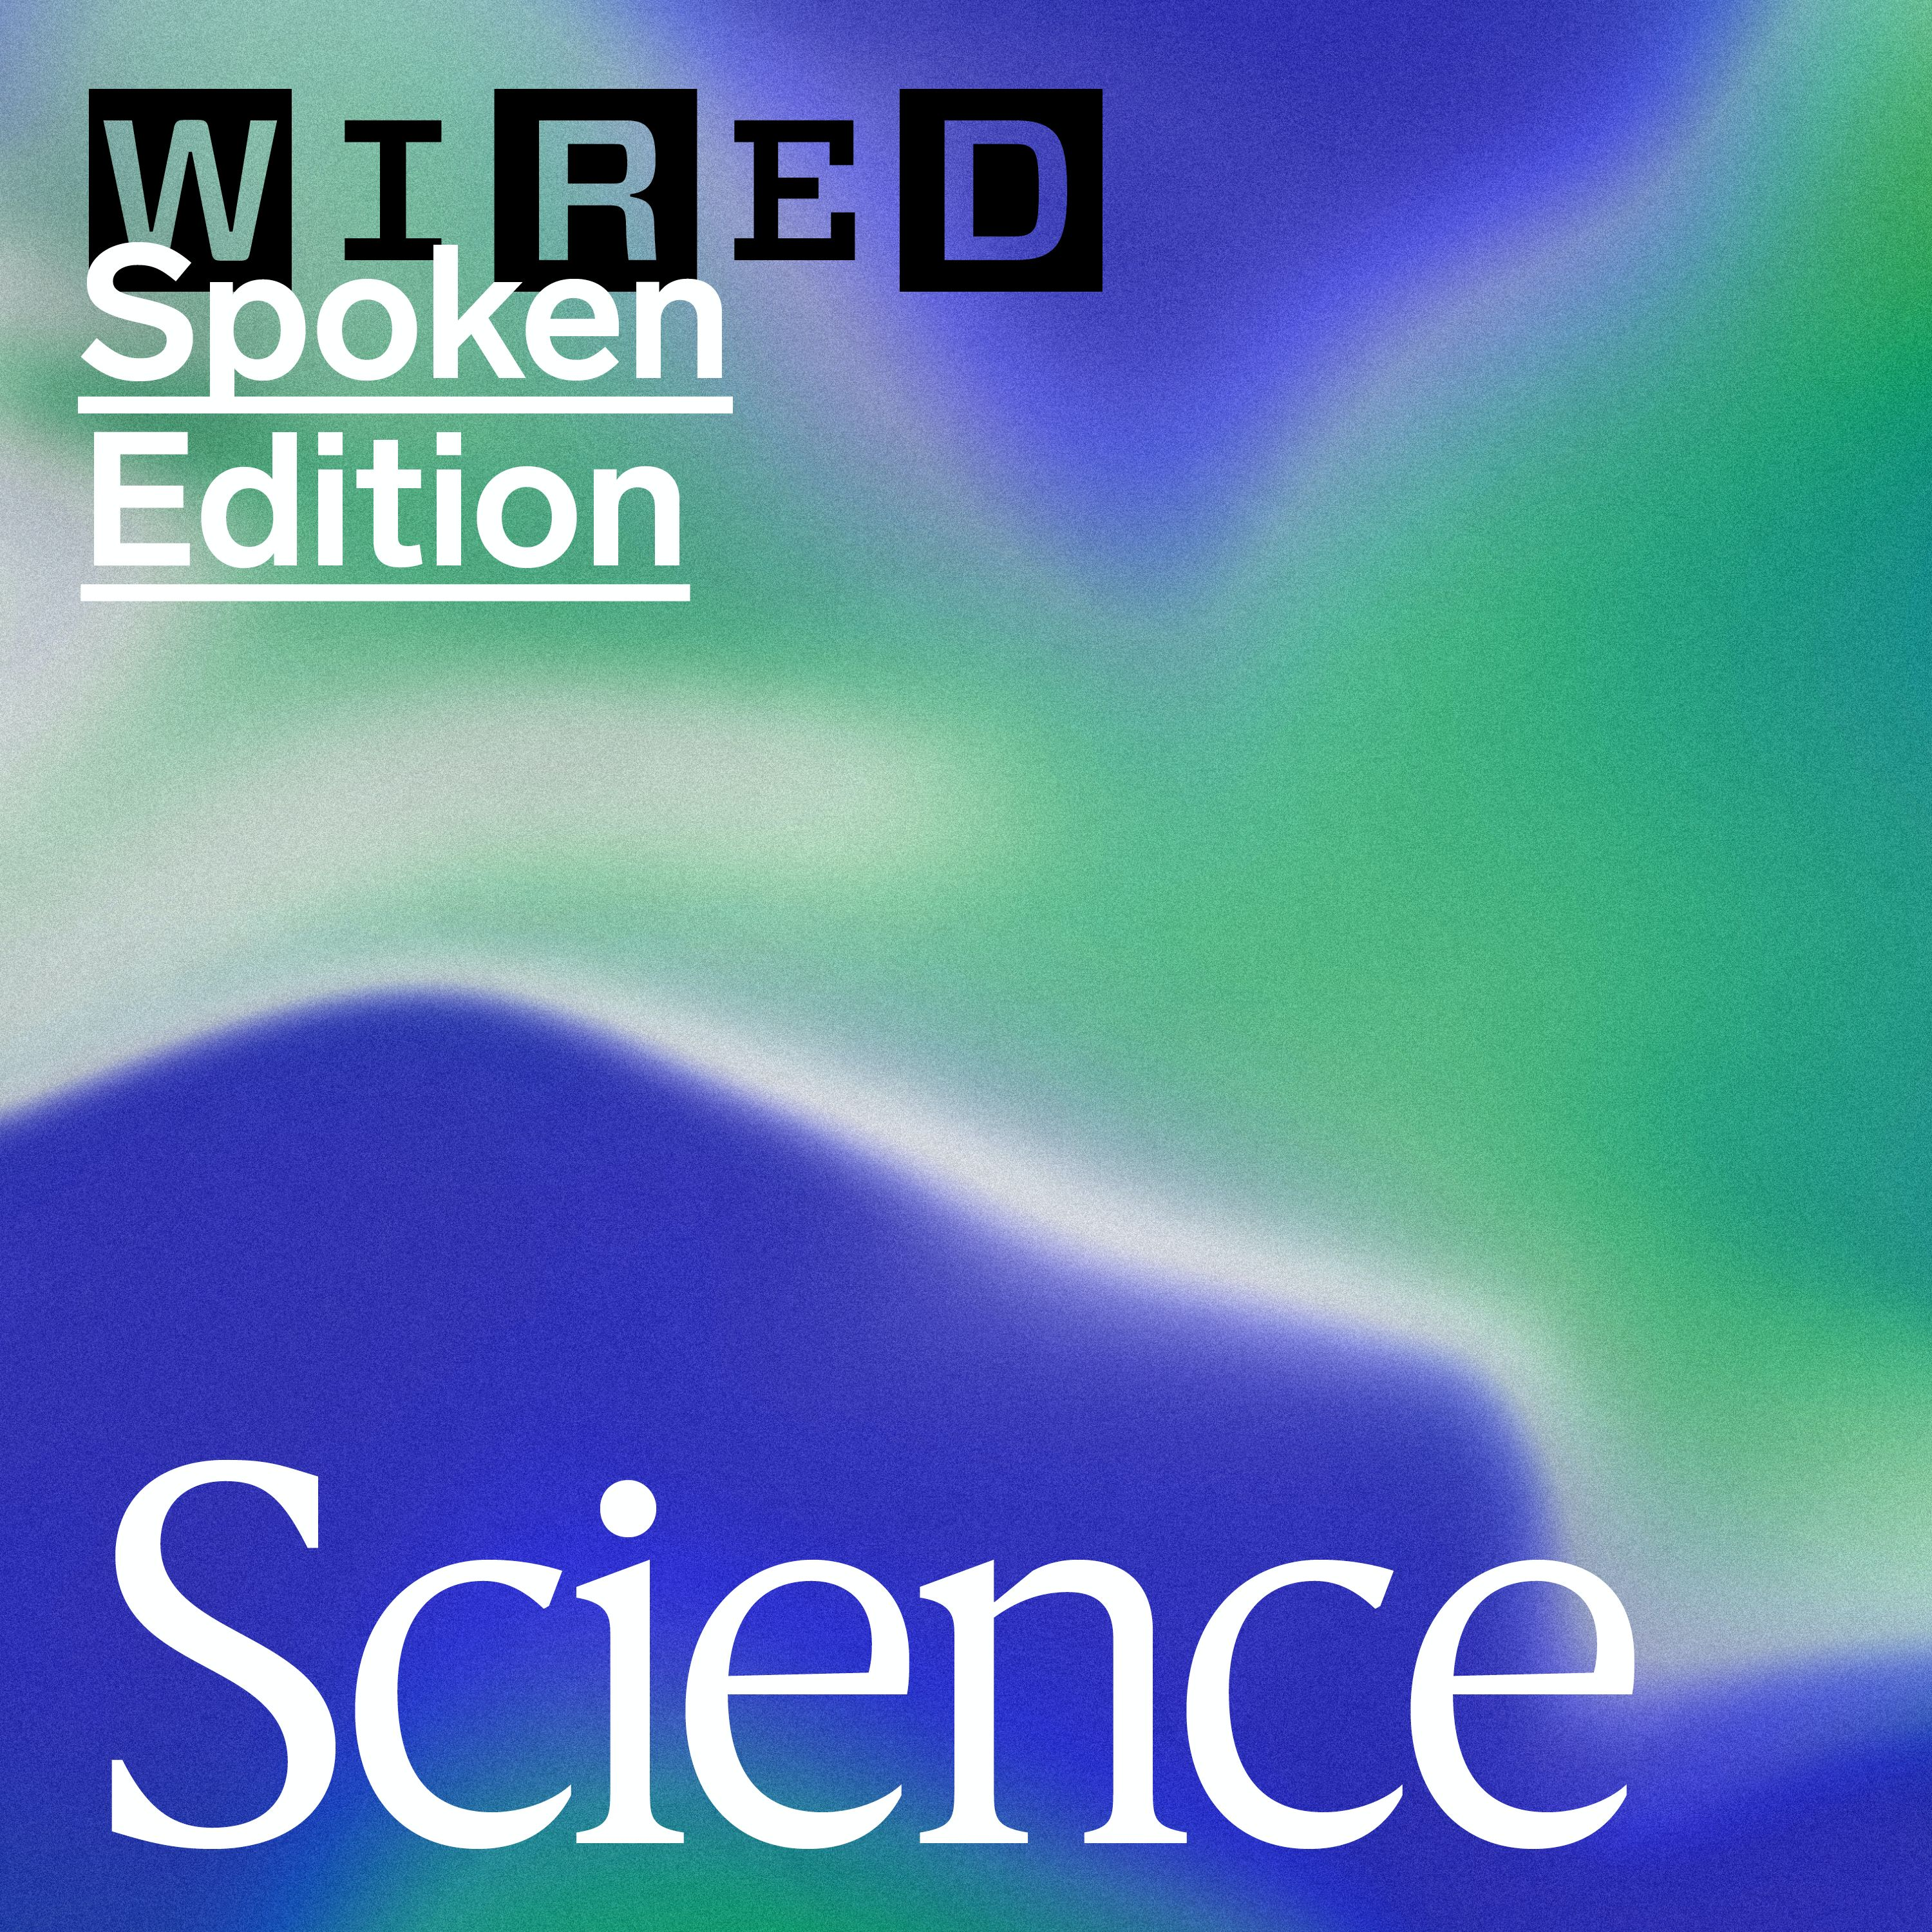 WIRED’s Required Science Reading From 2016